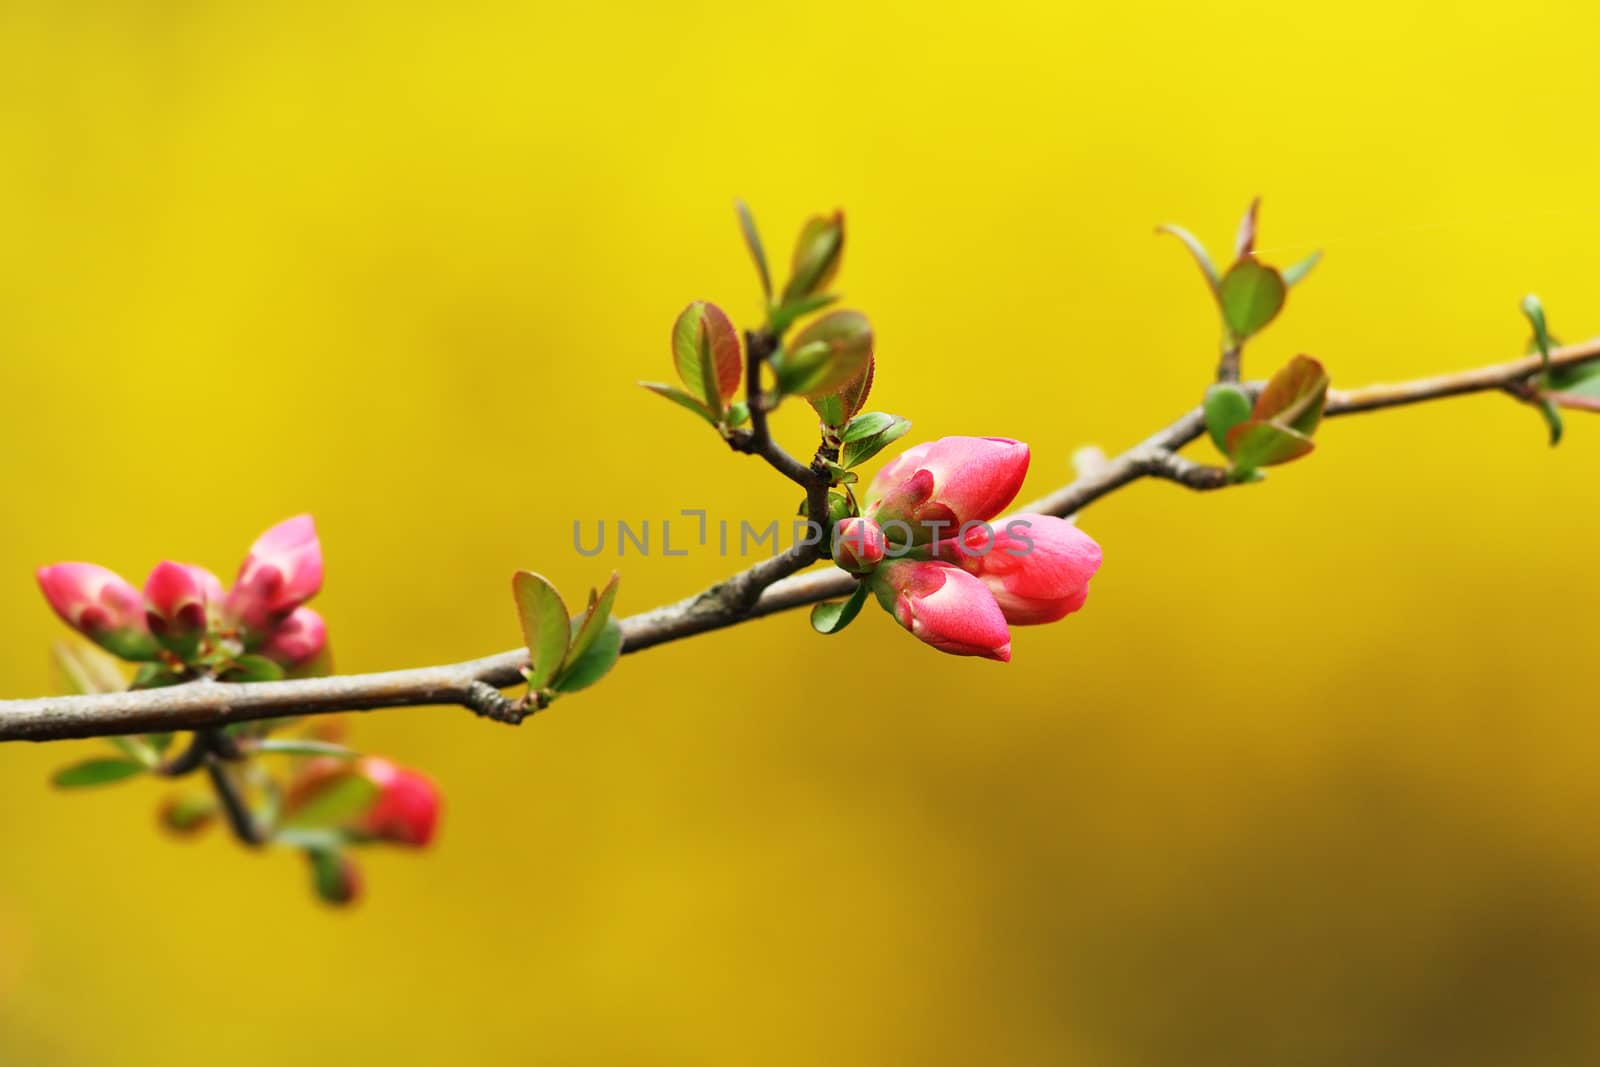 japanese violet cherry flowers over yellow out of focus background